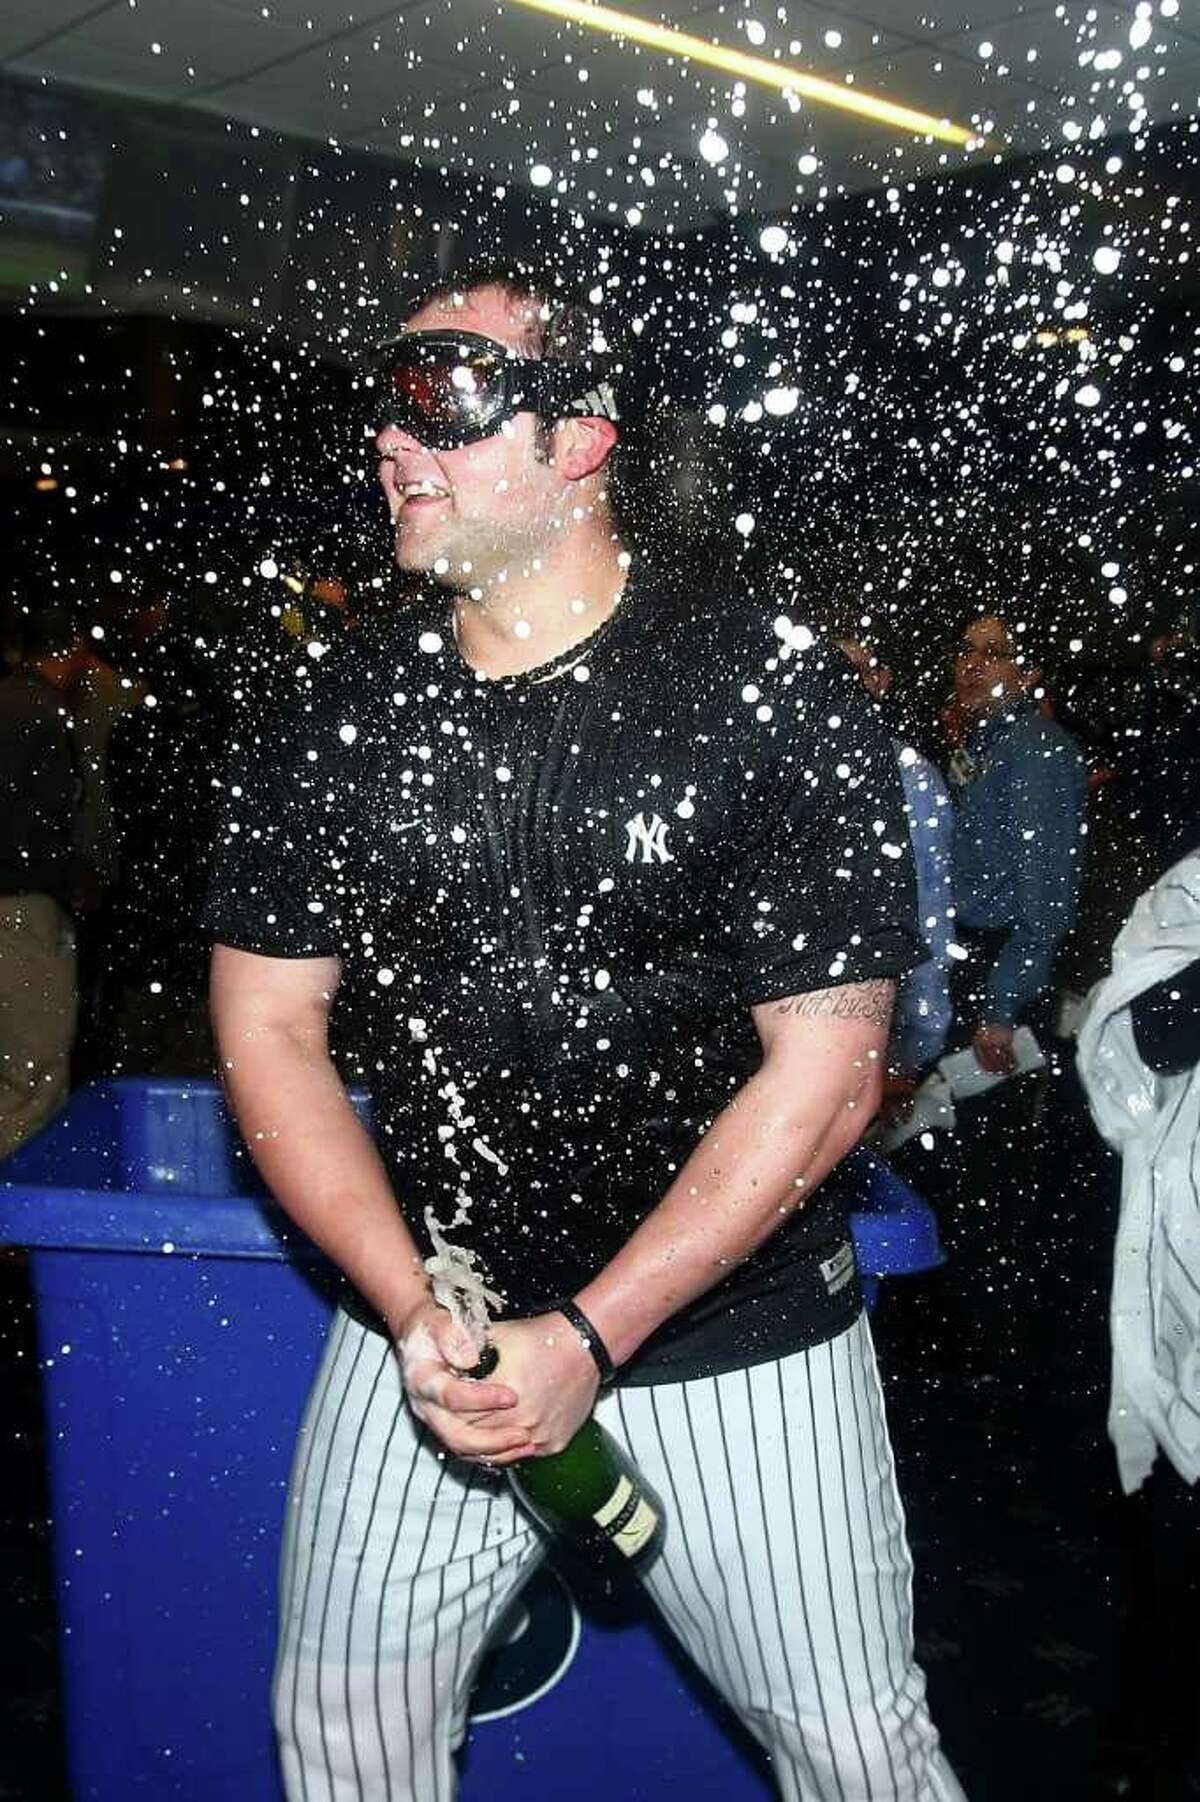 NEW YORK - OCTOBER 09: Joba Chamberlain #62 of the New York Yankees celebrates in the locker room against the Minnesota Twins during Game Three of the ALDS part of the 2010 MLB Playoffs at Yankee Stadium on October 9, 2010 in the Bronx borough of New York City. (Photo by Jim McIsaac/Getty Images) *** Local Caption *** Joba Chamberlain